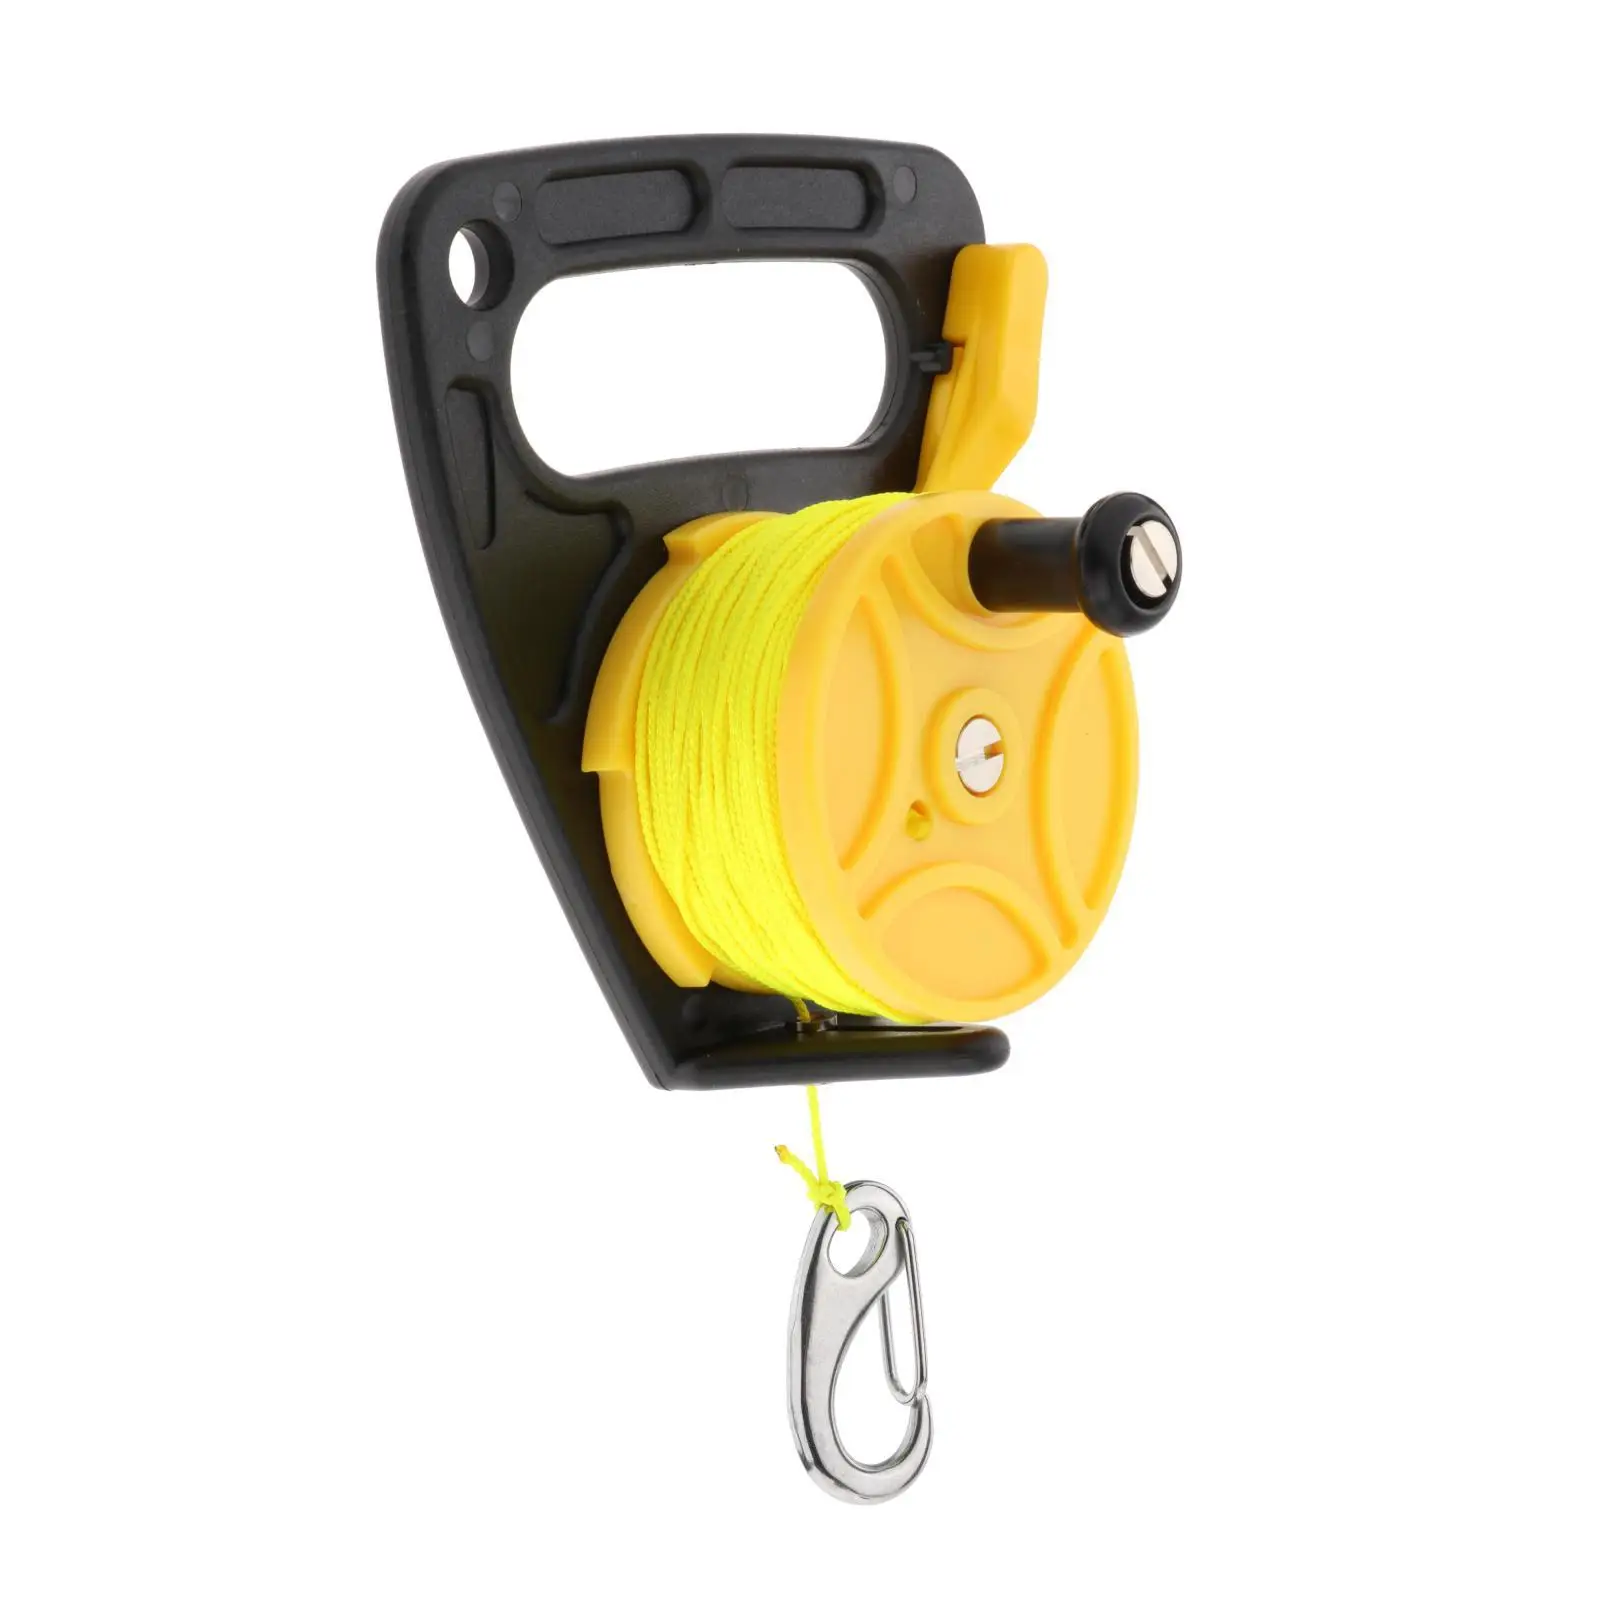 Multi-Purpose Scuba Diving Line Reel with Handle Kayak Anchor Yellow Line for Snorkeling Open Water Wreck Exploration Cave Dive